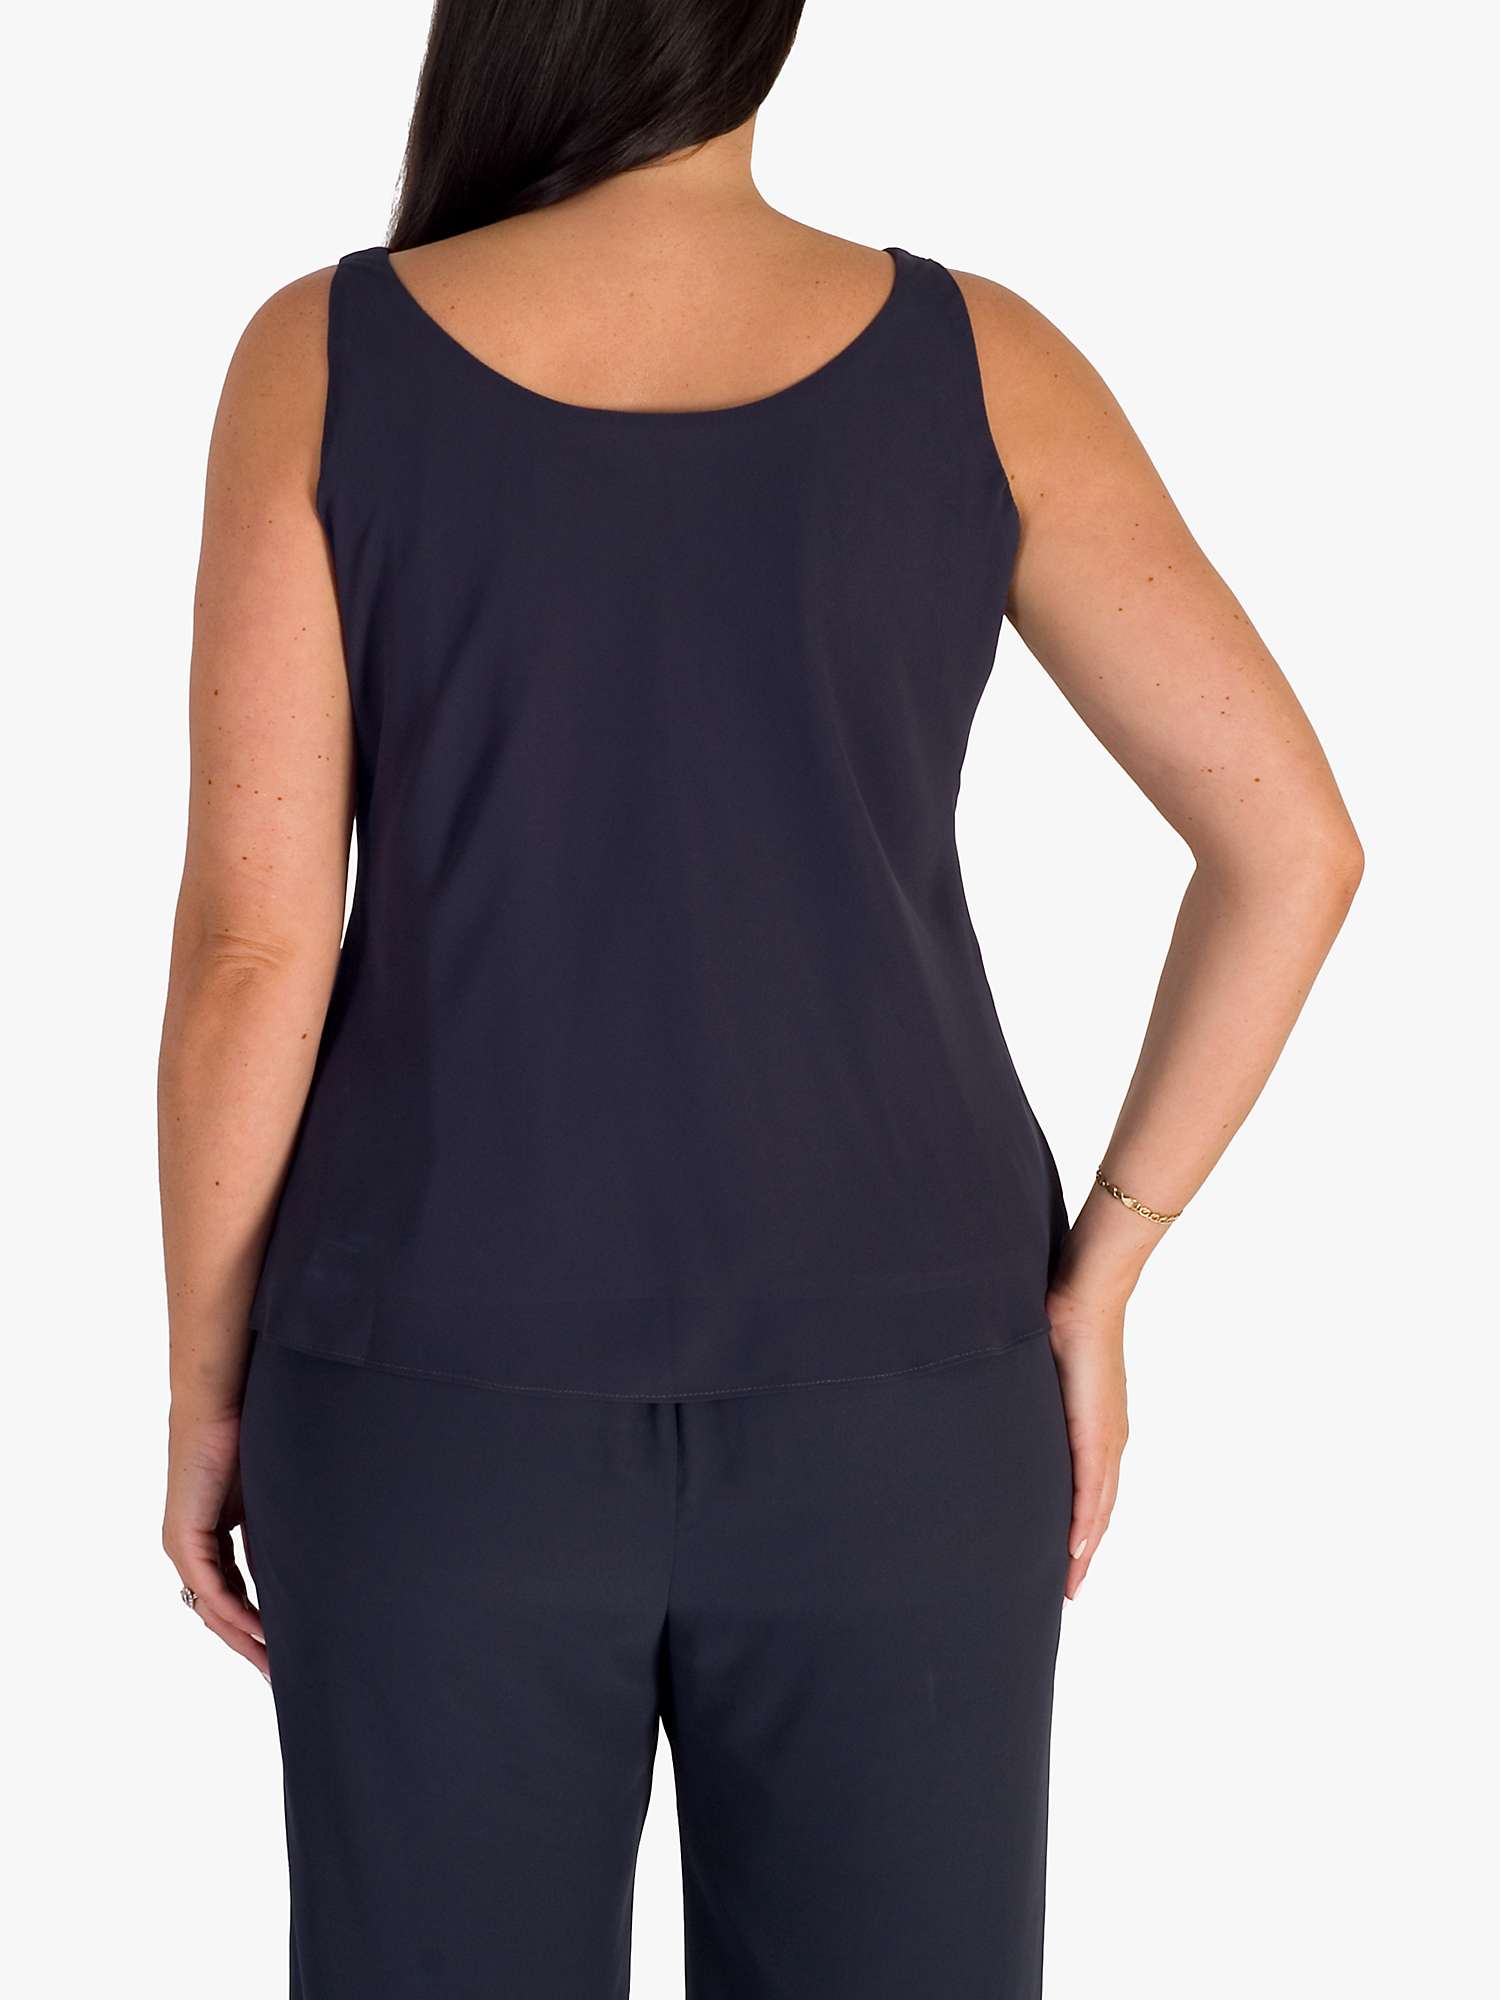 Chesca Chiffon Camisole, Pewter Grey at John Lewis & Partners